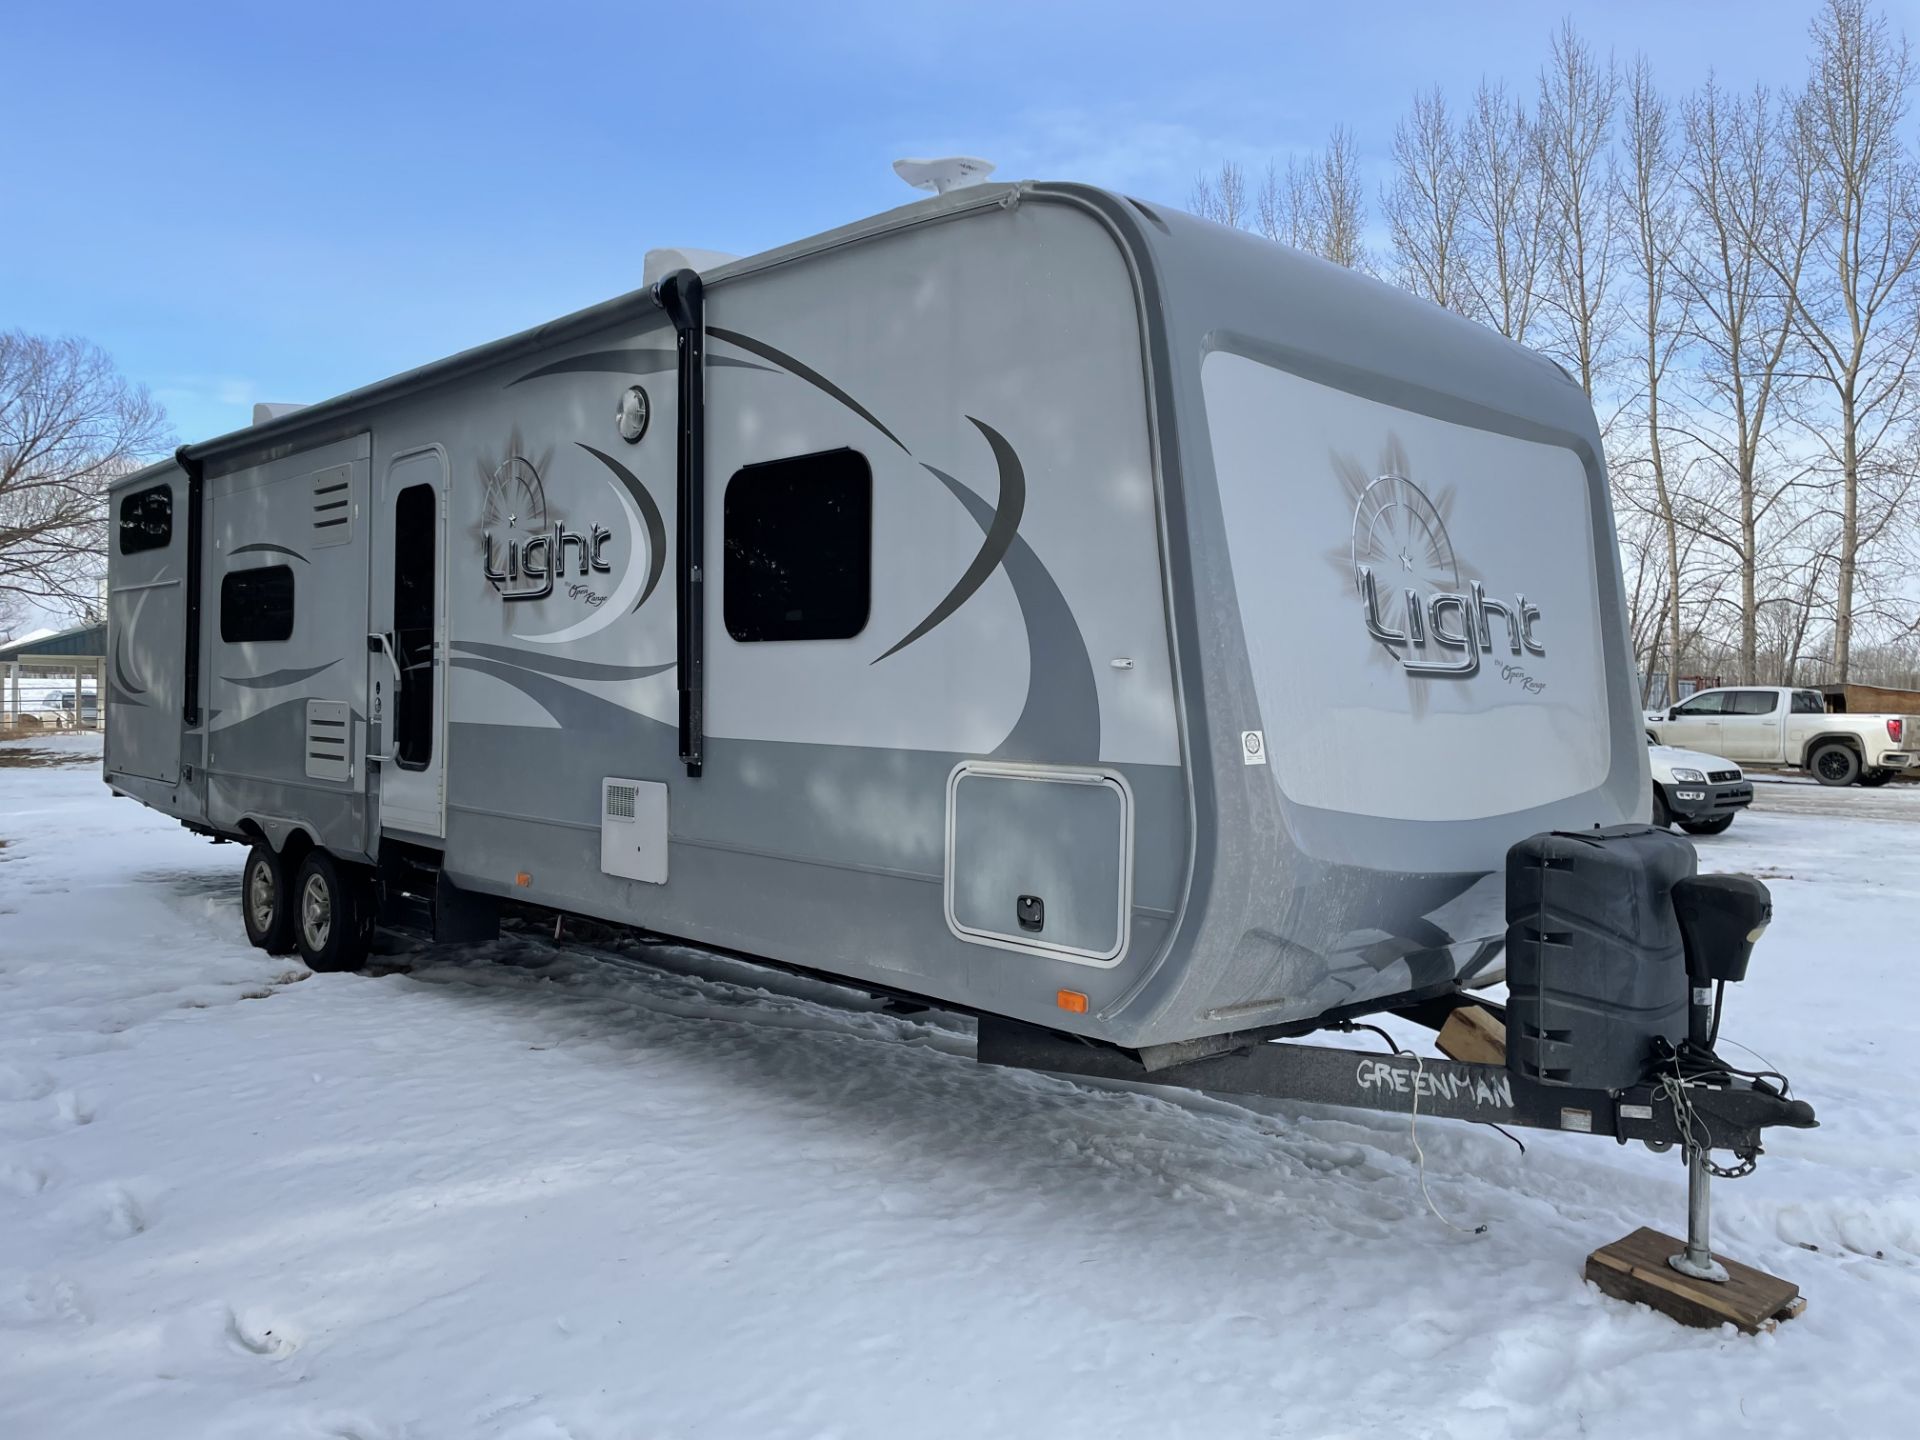 2015 LIGHT BY OPEN RANGE 308 BHS, HARDWALL, 3-SLIDES, BUNKROOM, POWER AWNING, JACK, STABILIZERS, - Image 3 of 17